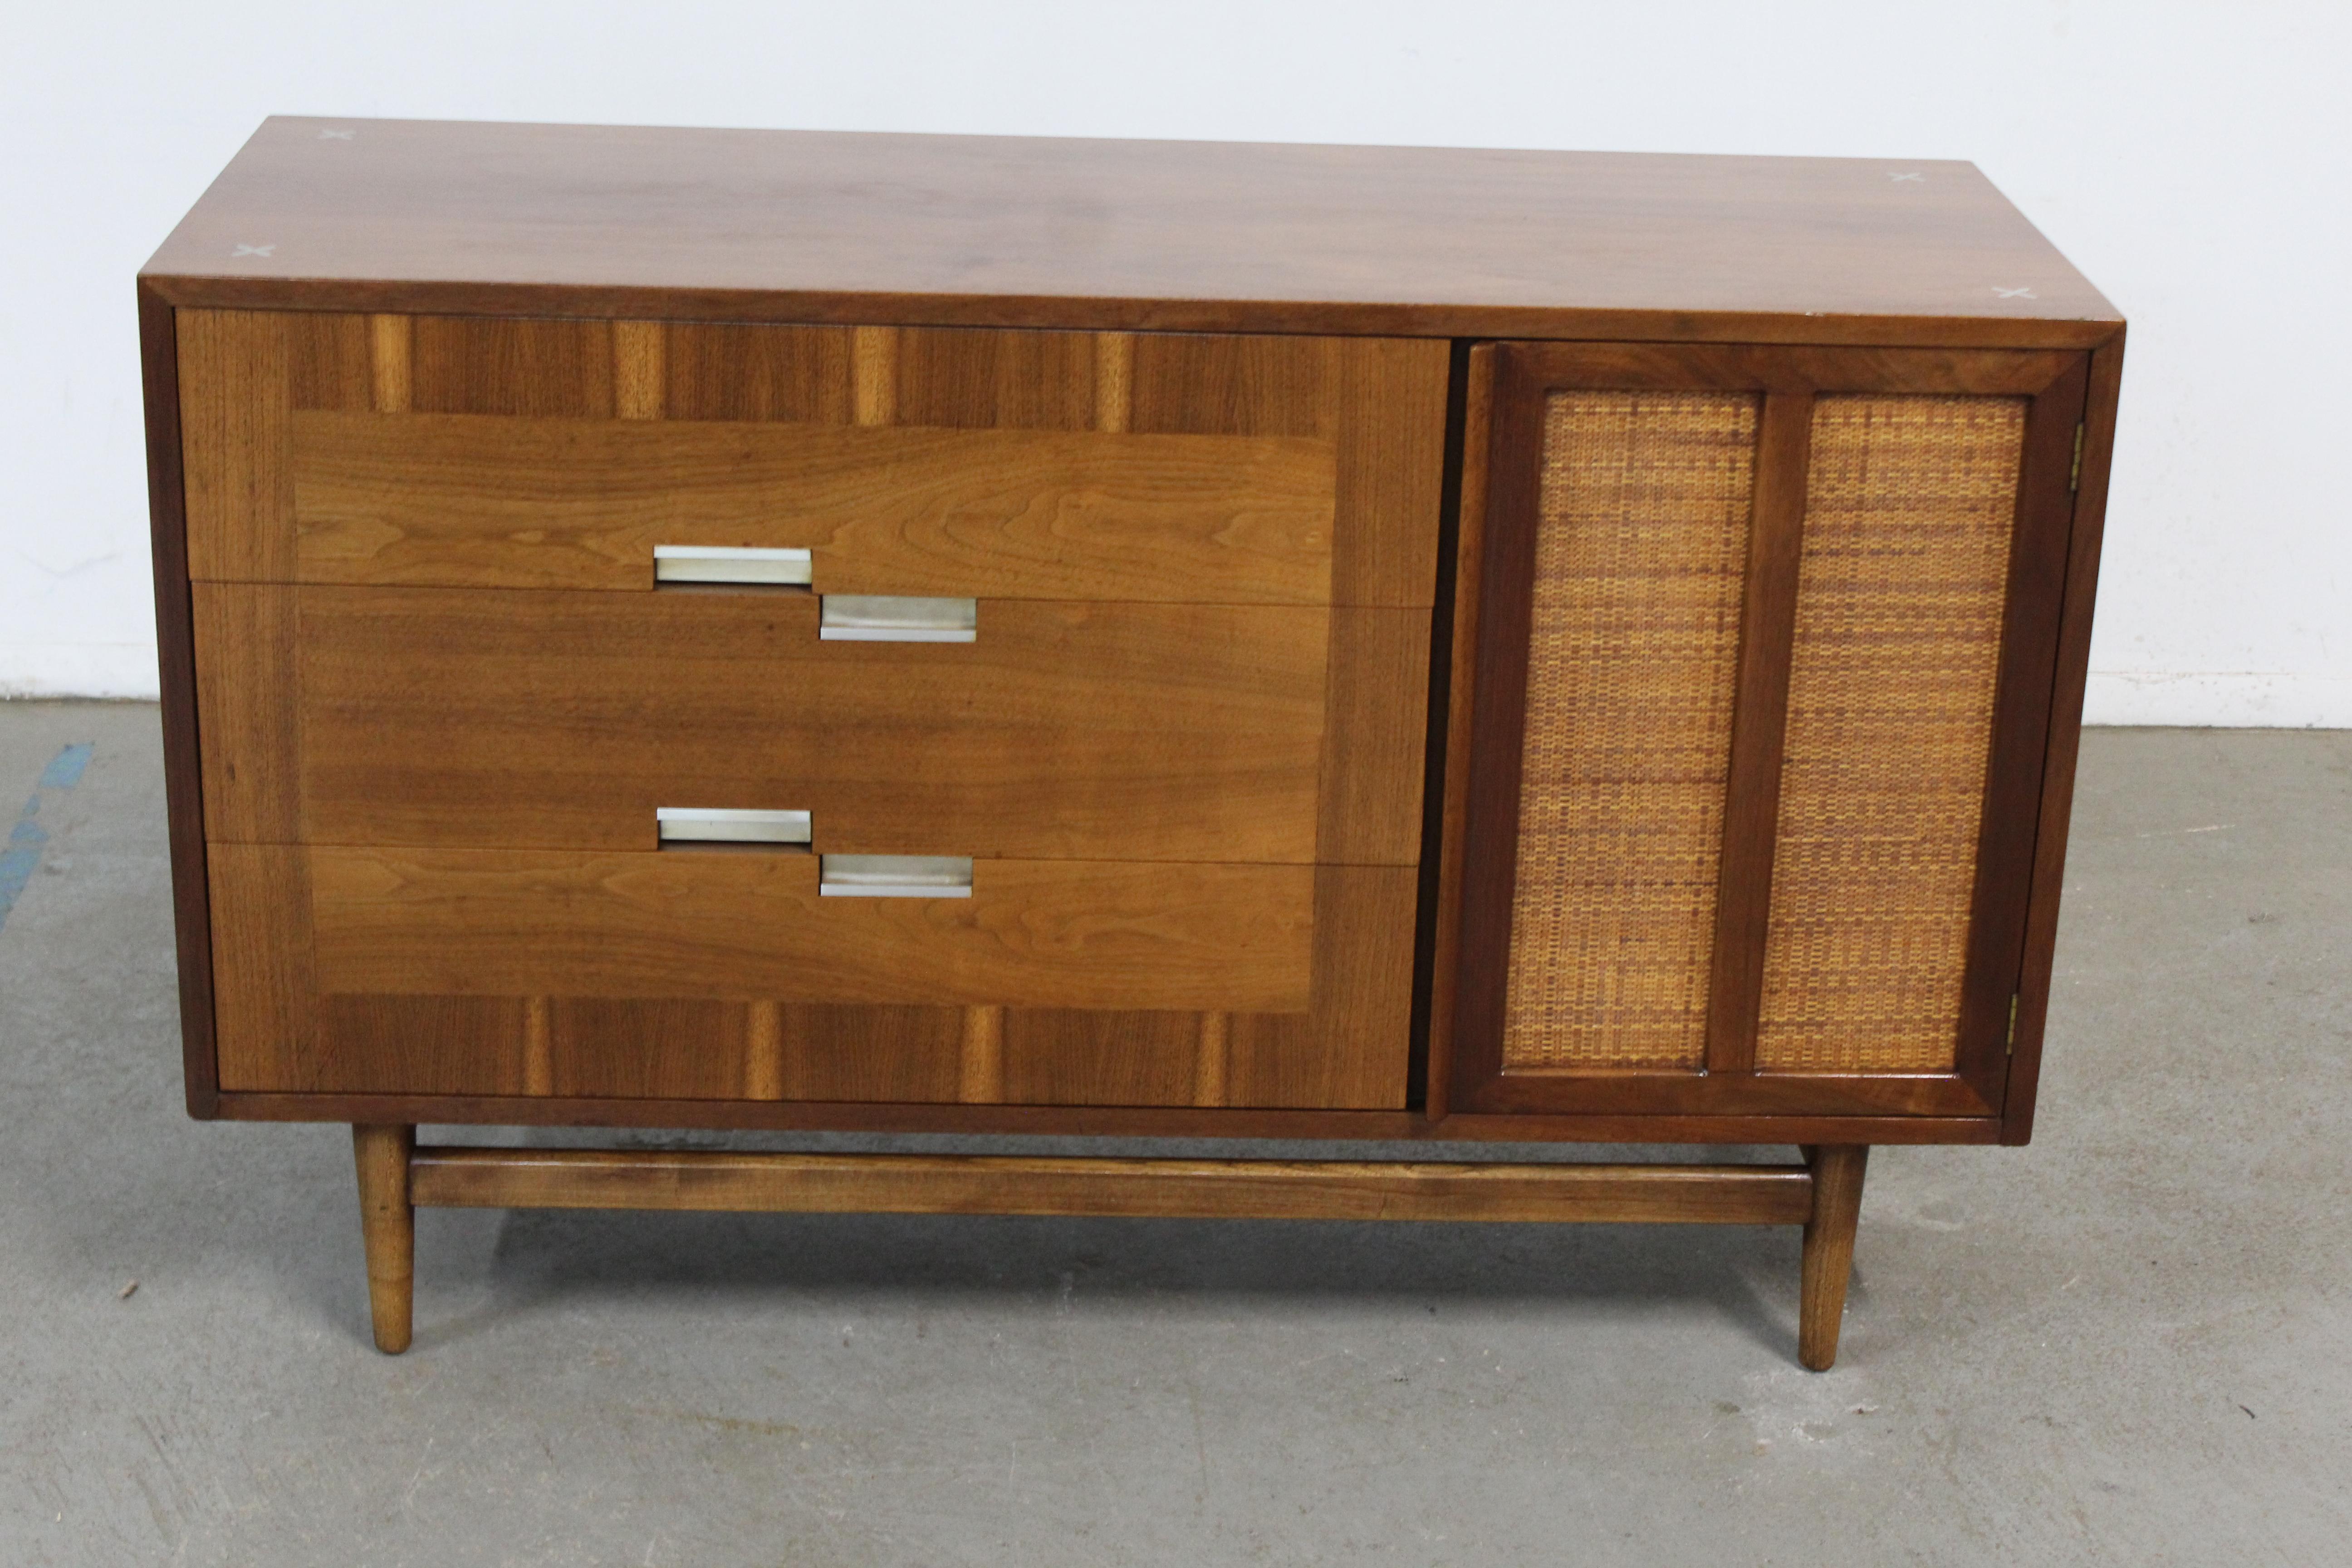 Mid-Century Modern walnut mini sideboard/credenza by American of Martinsville 

Offered is a Mid-Century Danish Modern American of Martinsville walnut credenza. This piece has the look. This is a walnut cabinet with a caned door and 3 drawers. It